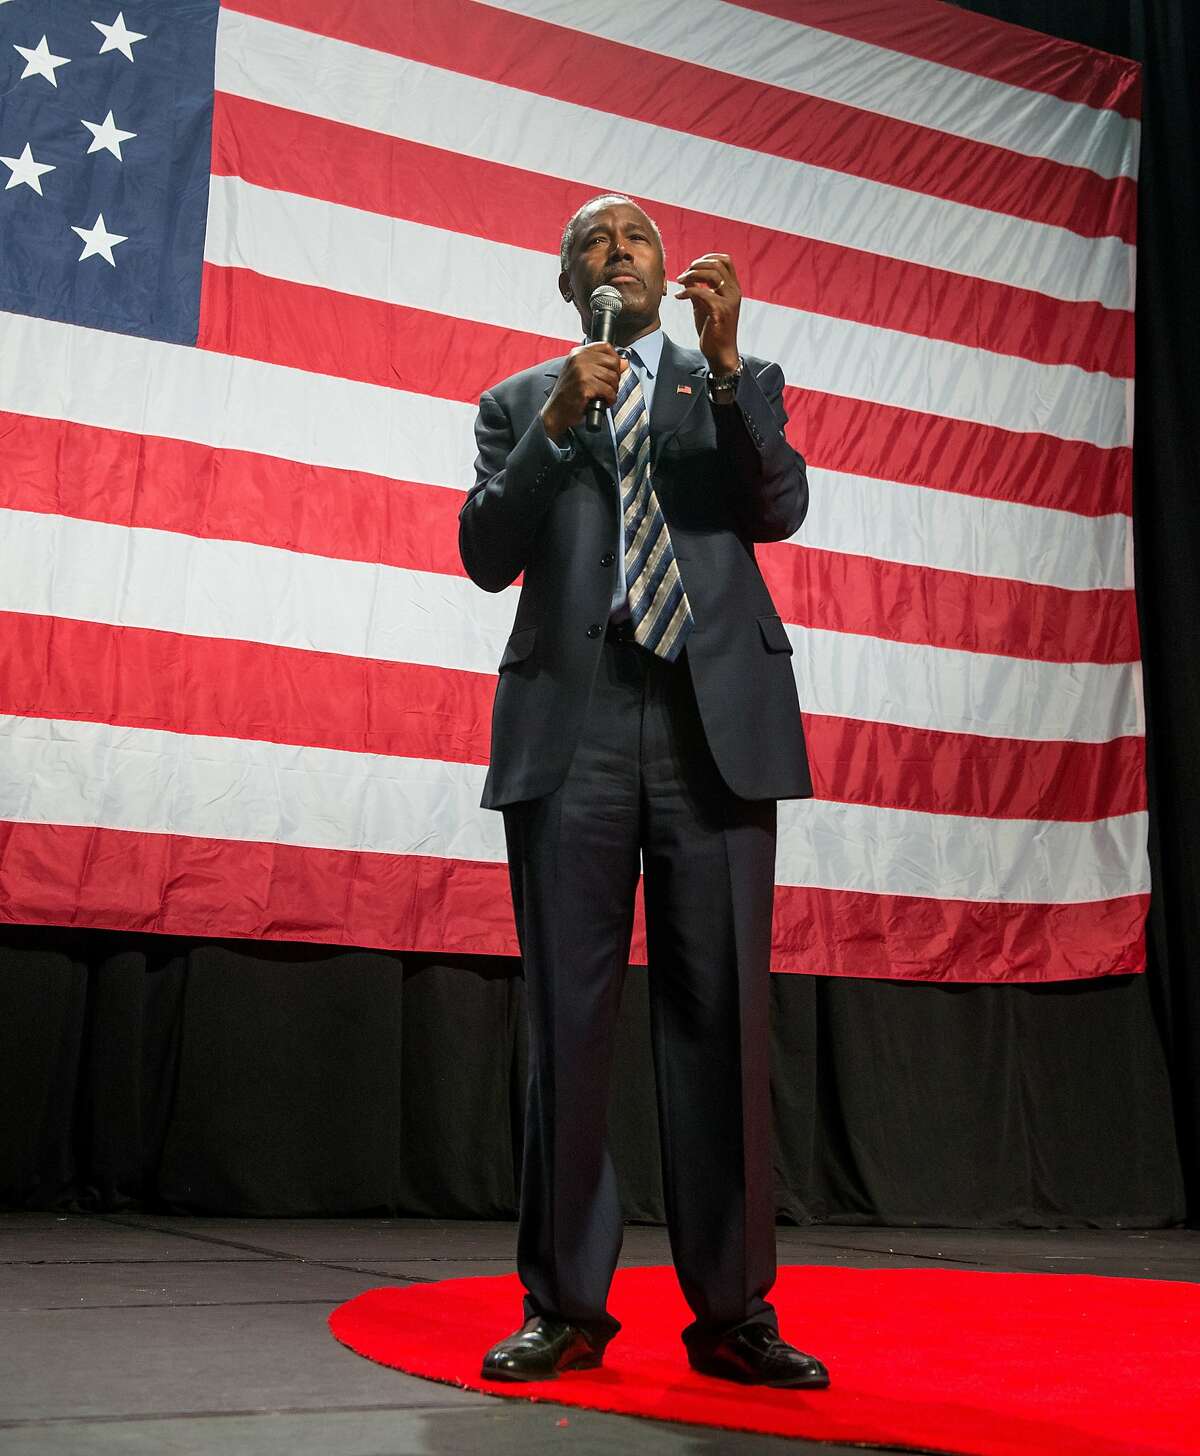 Presidential candidate Dr. Ben Carson speaks to more than 6000 people during a rally at the Anaheim Convention Center arena on in Anaheim, Calif., on Wednesday, Sept. 9, 2015. (Leonard Ortiz/The Orange County Register via AP)